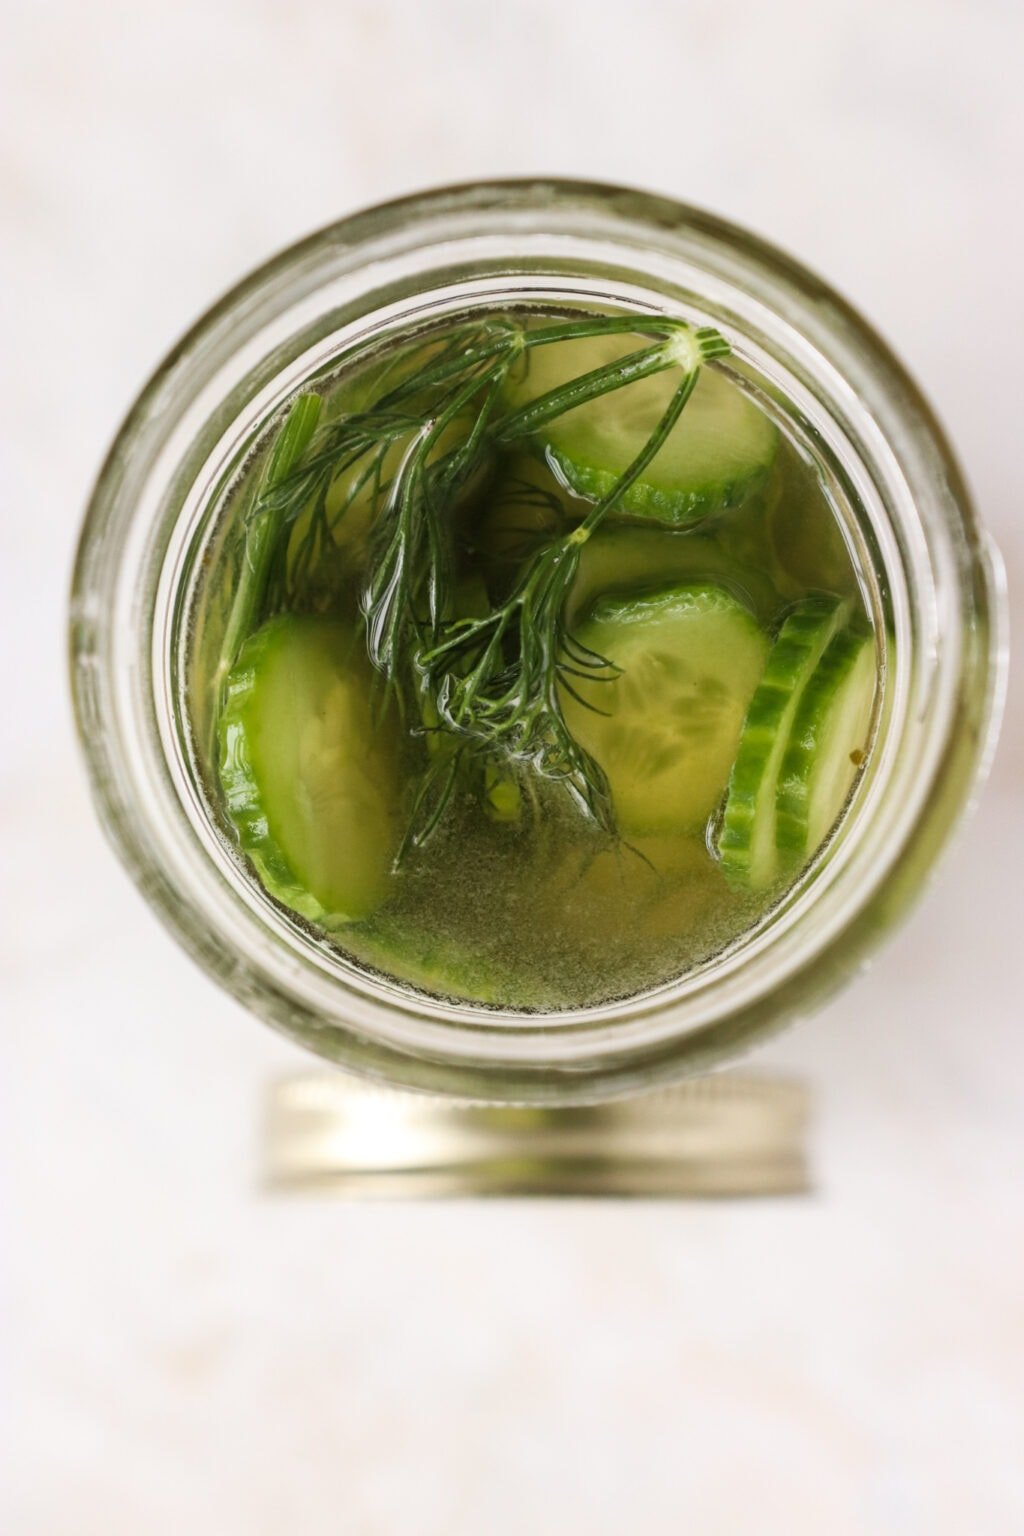 Apple Cider Vinegar Cucumber Pickles with Dill in a pickle jar